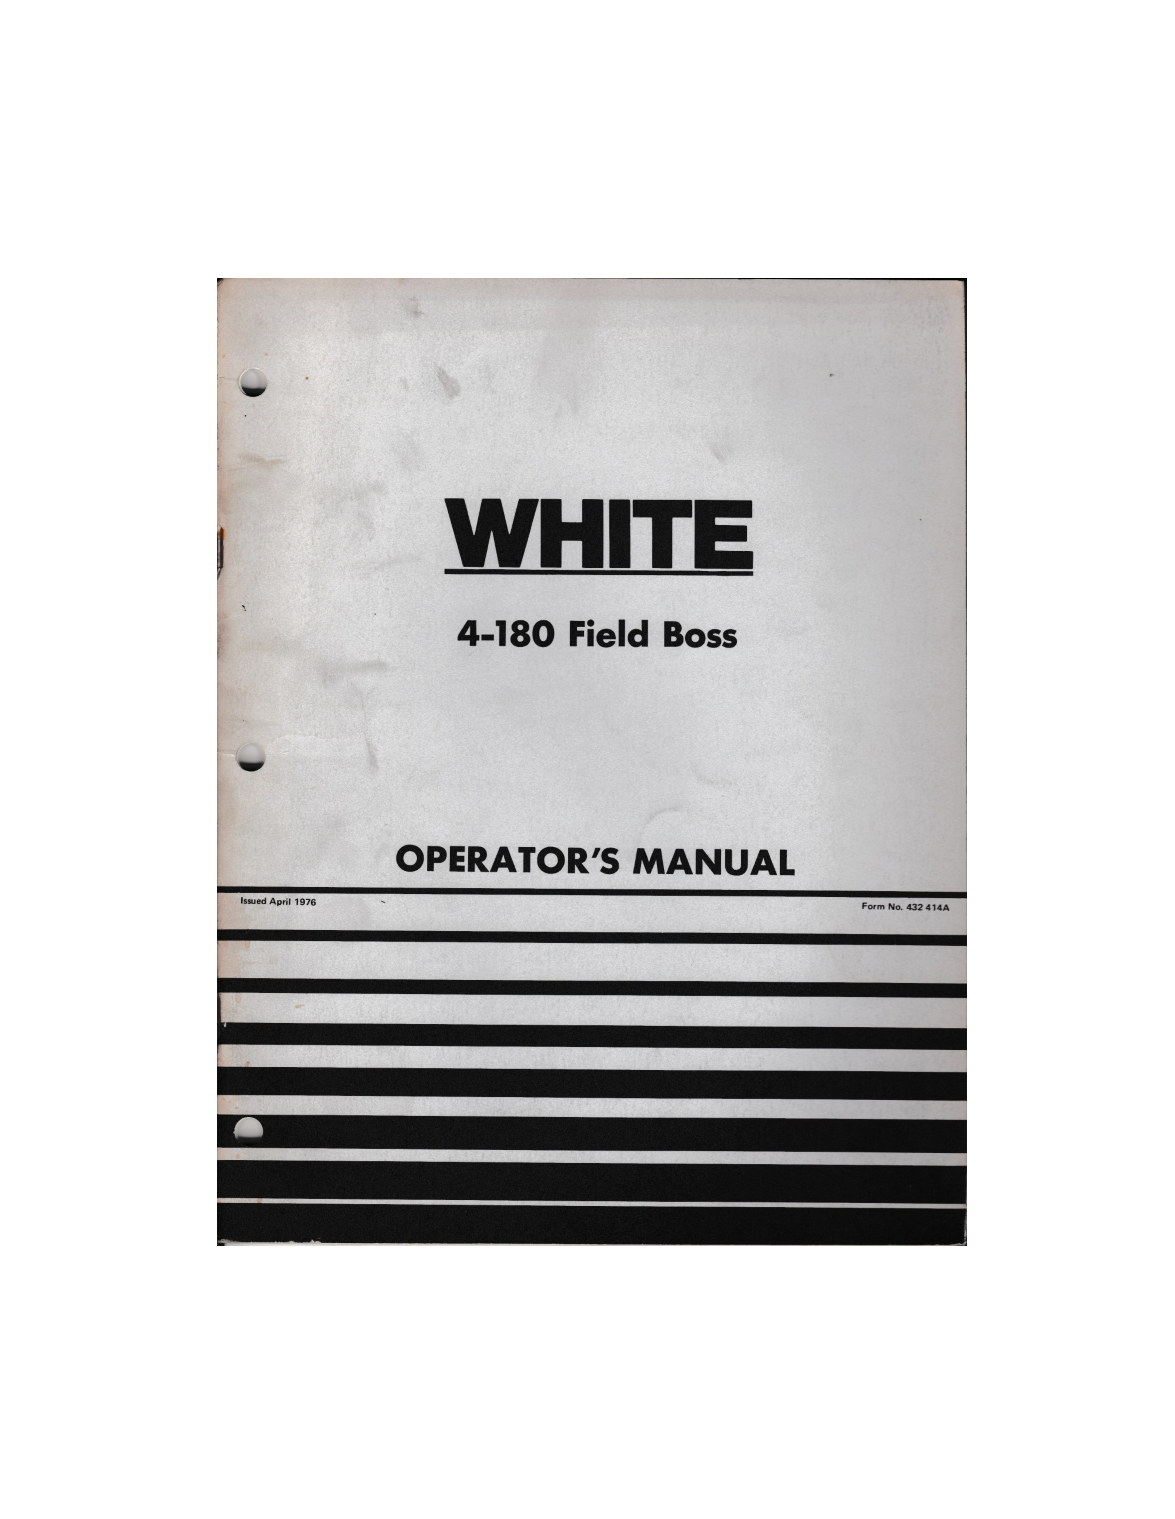 White 4-180 Field Boss Tractor Operator's Manual » Flynn's Tractor ...